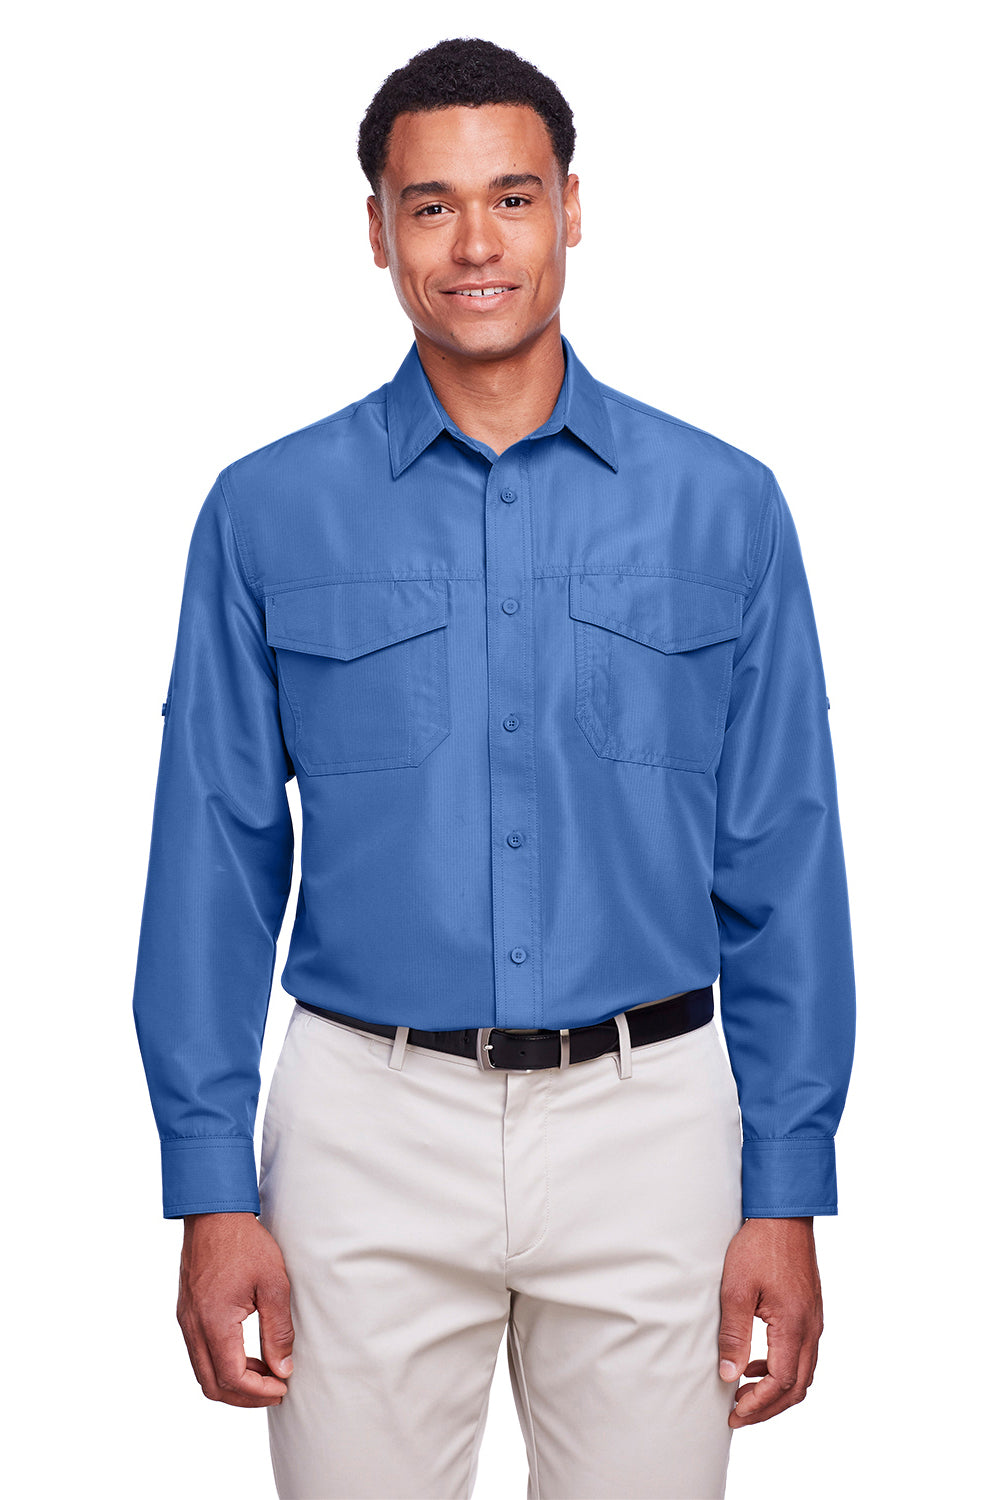 Harriton M580L Mens Key West Performance Moisture Wicking Long Sleeve Button Down Shirt Pool Blue Front